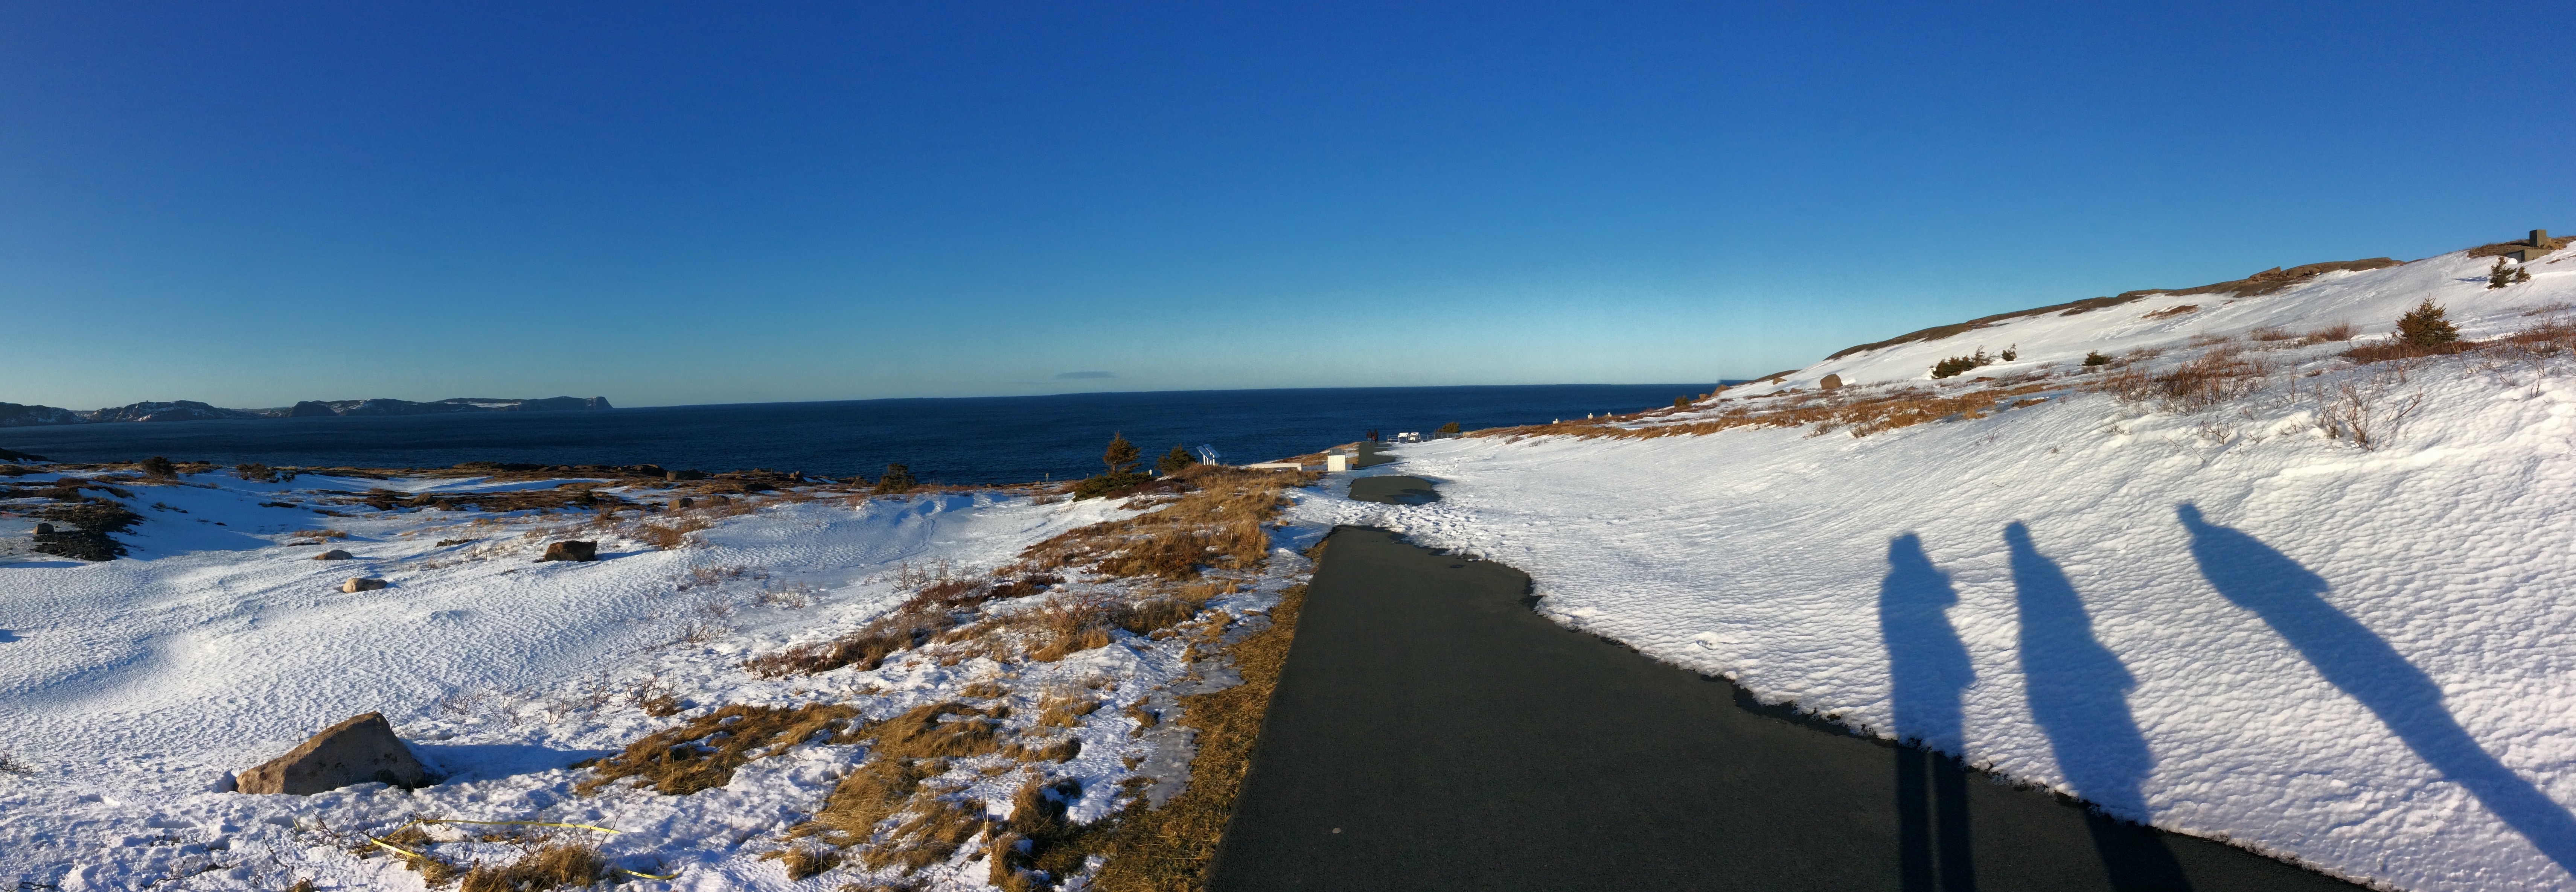 shadows of three people on a batch of snow with a dark path ahead of them, sea in the background and a blue sky above. 